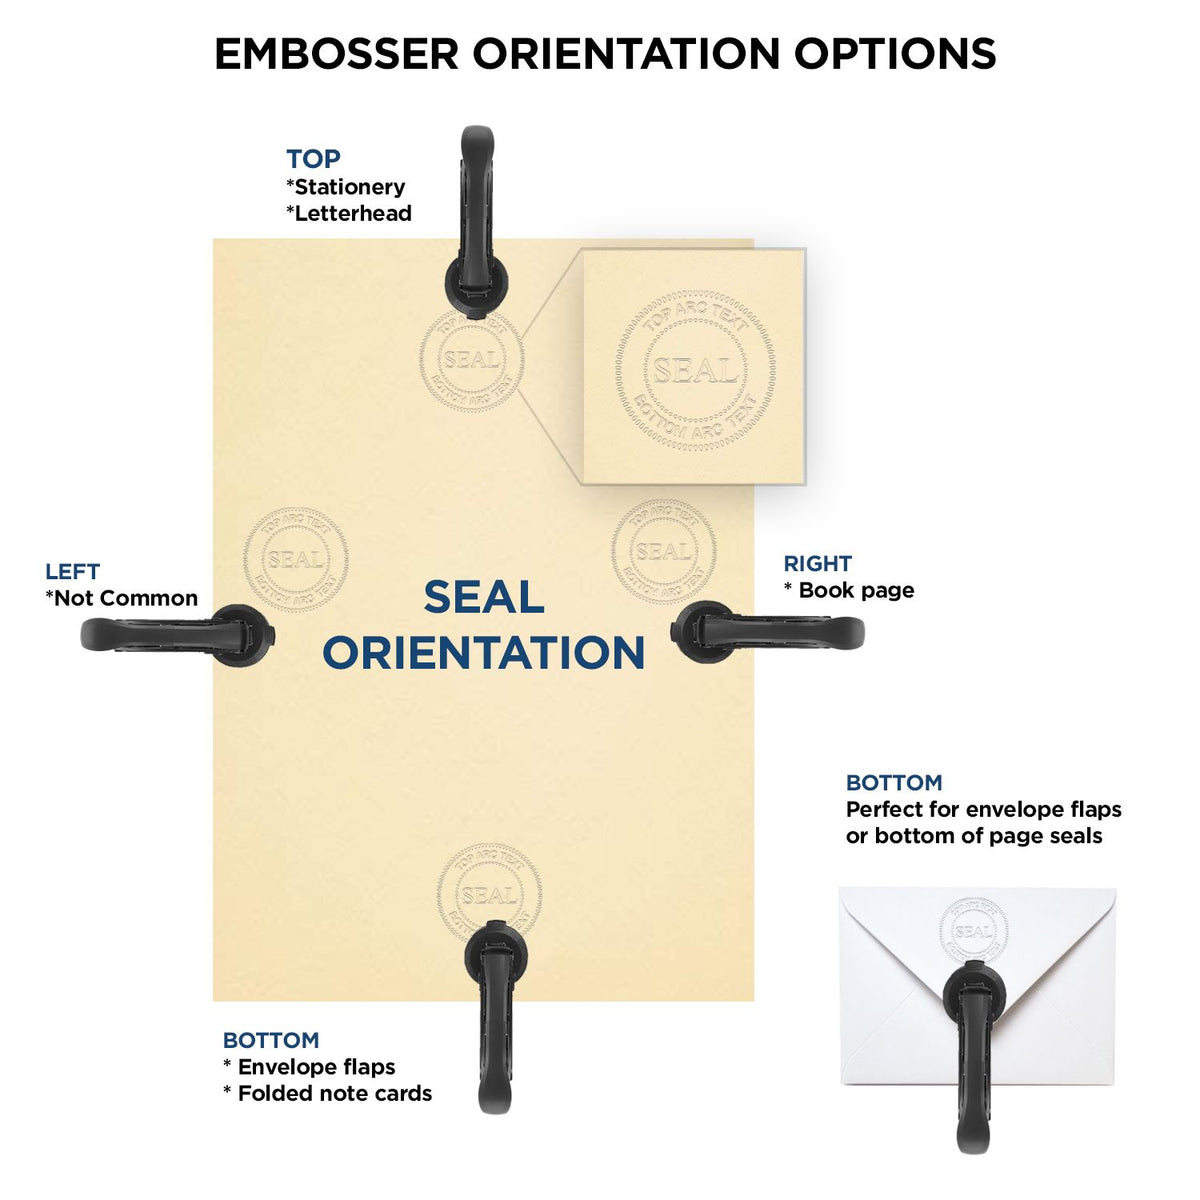 An infographic for the Handheld Minnesota Architect Seal Embosser showing embosser orientation, this is showing examples of a top, bottom, right and left insert.